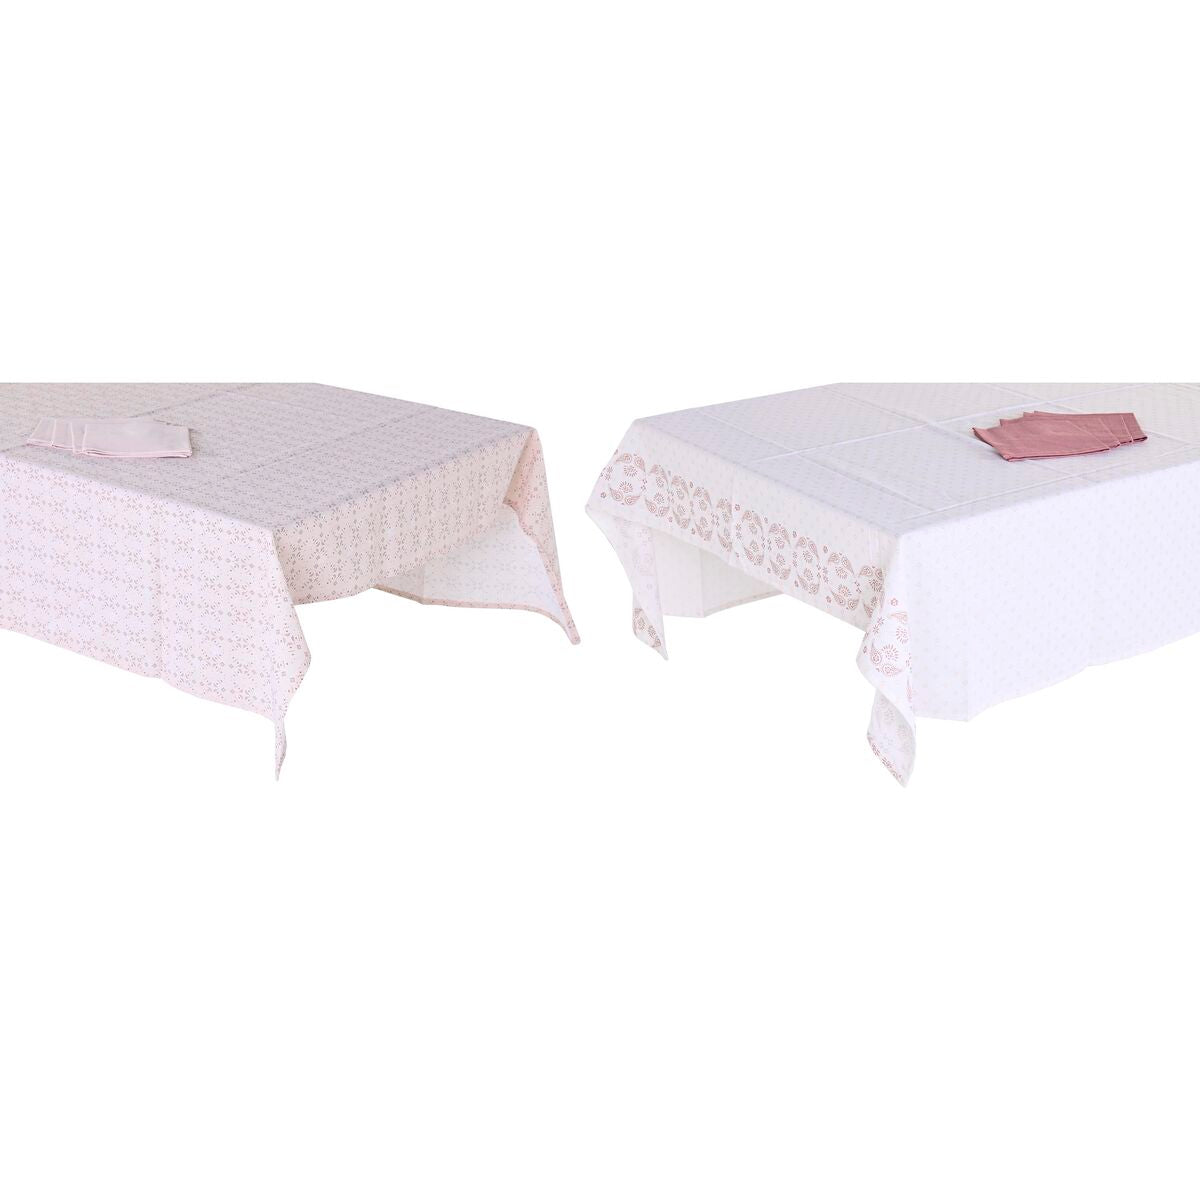 Tablecloth and napkins DKD Home Decor 150 x 250 x 0,5 cm Pink White (2 Units)